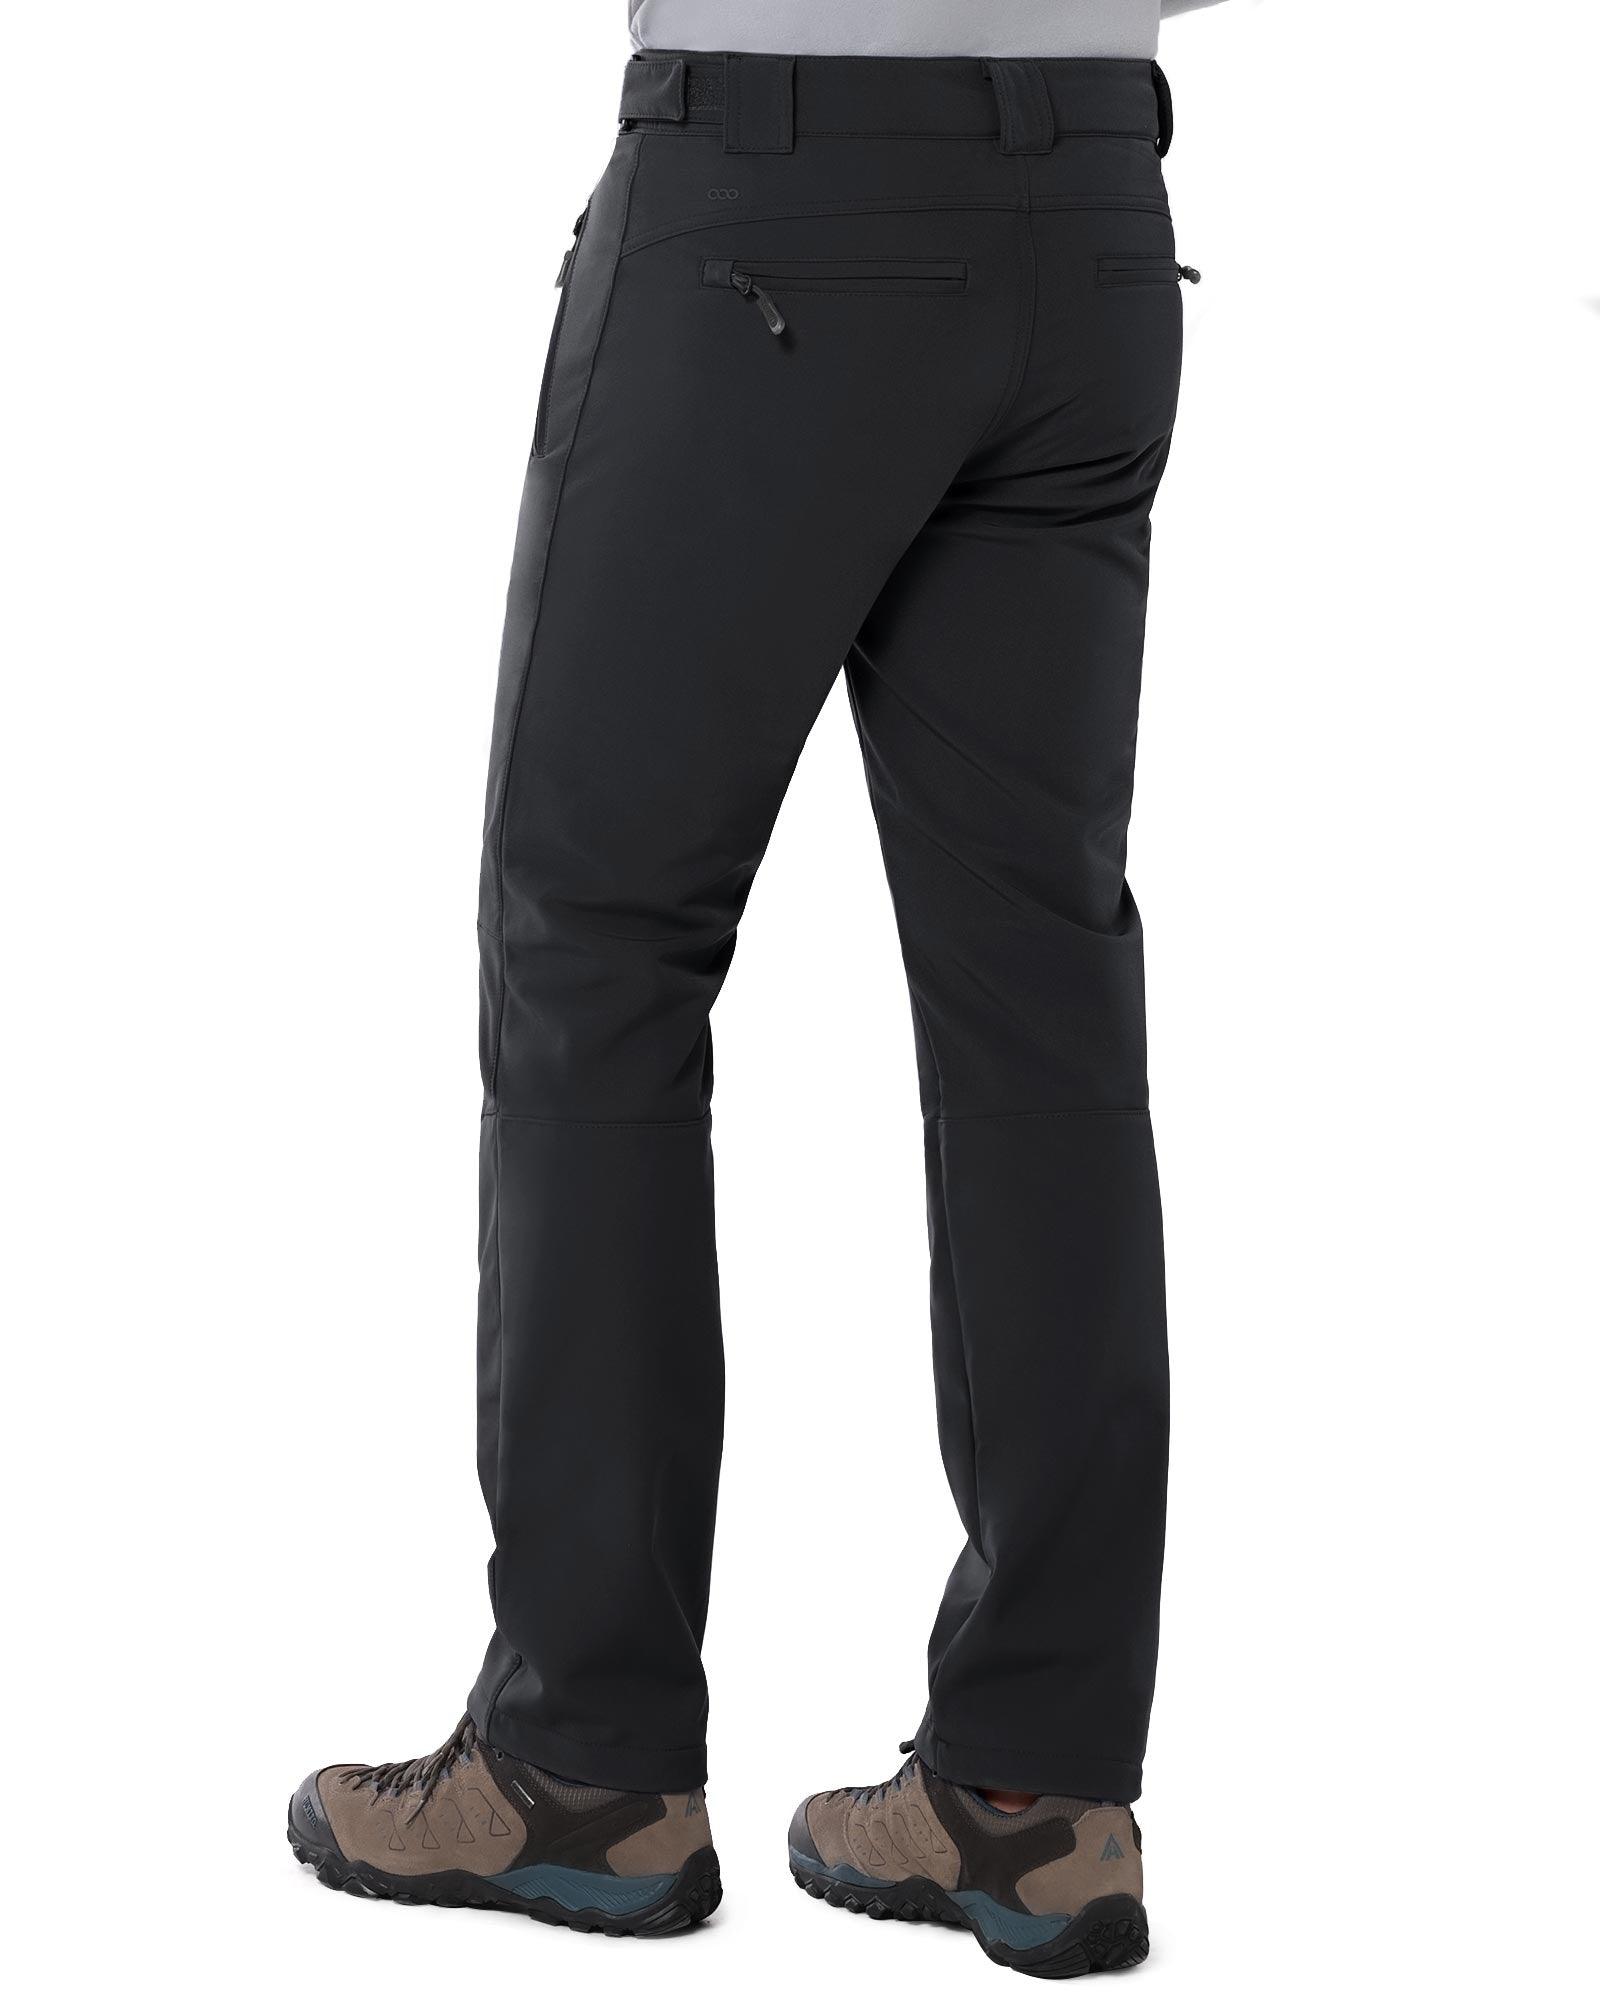 8000mm W/P Index Men's Snow Fleece Lined Pants with 4 Pockets and Adju –  33,000ft